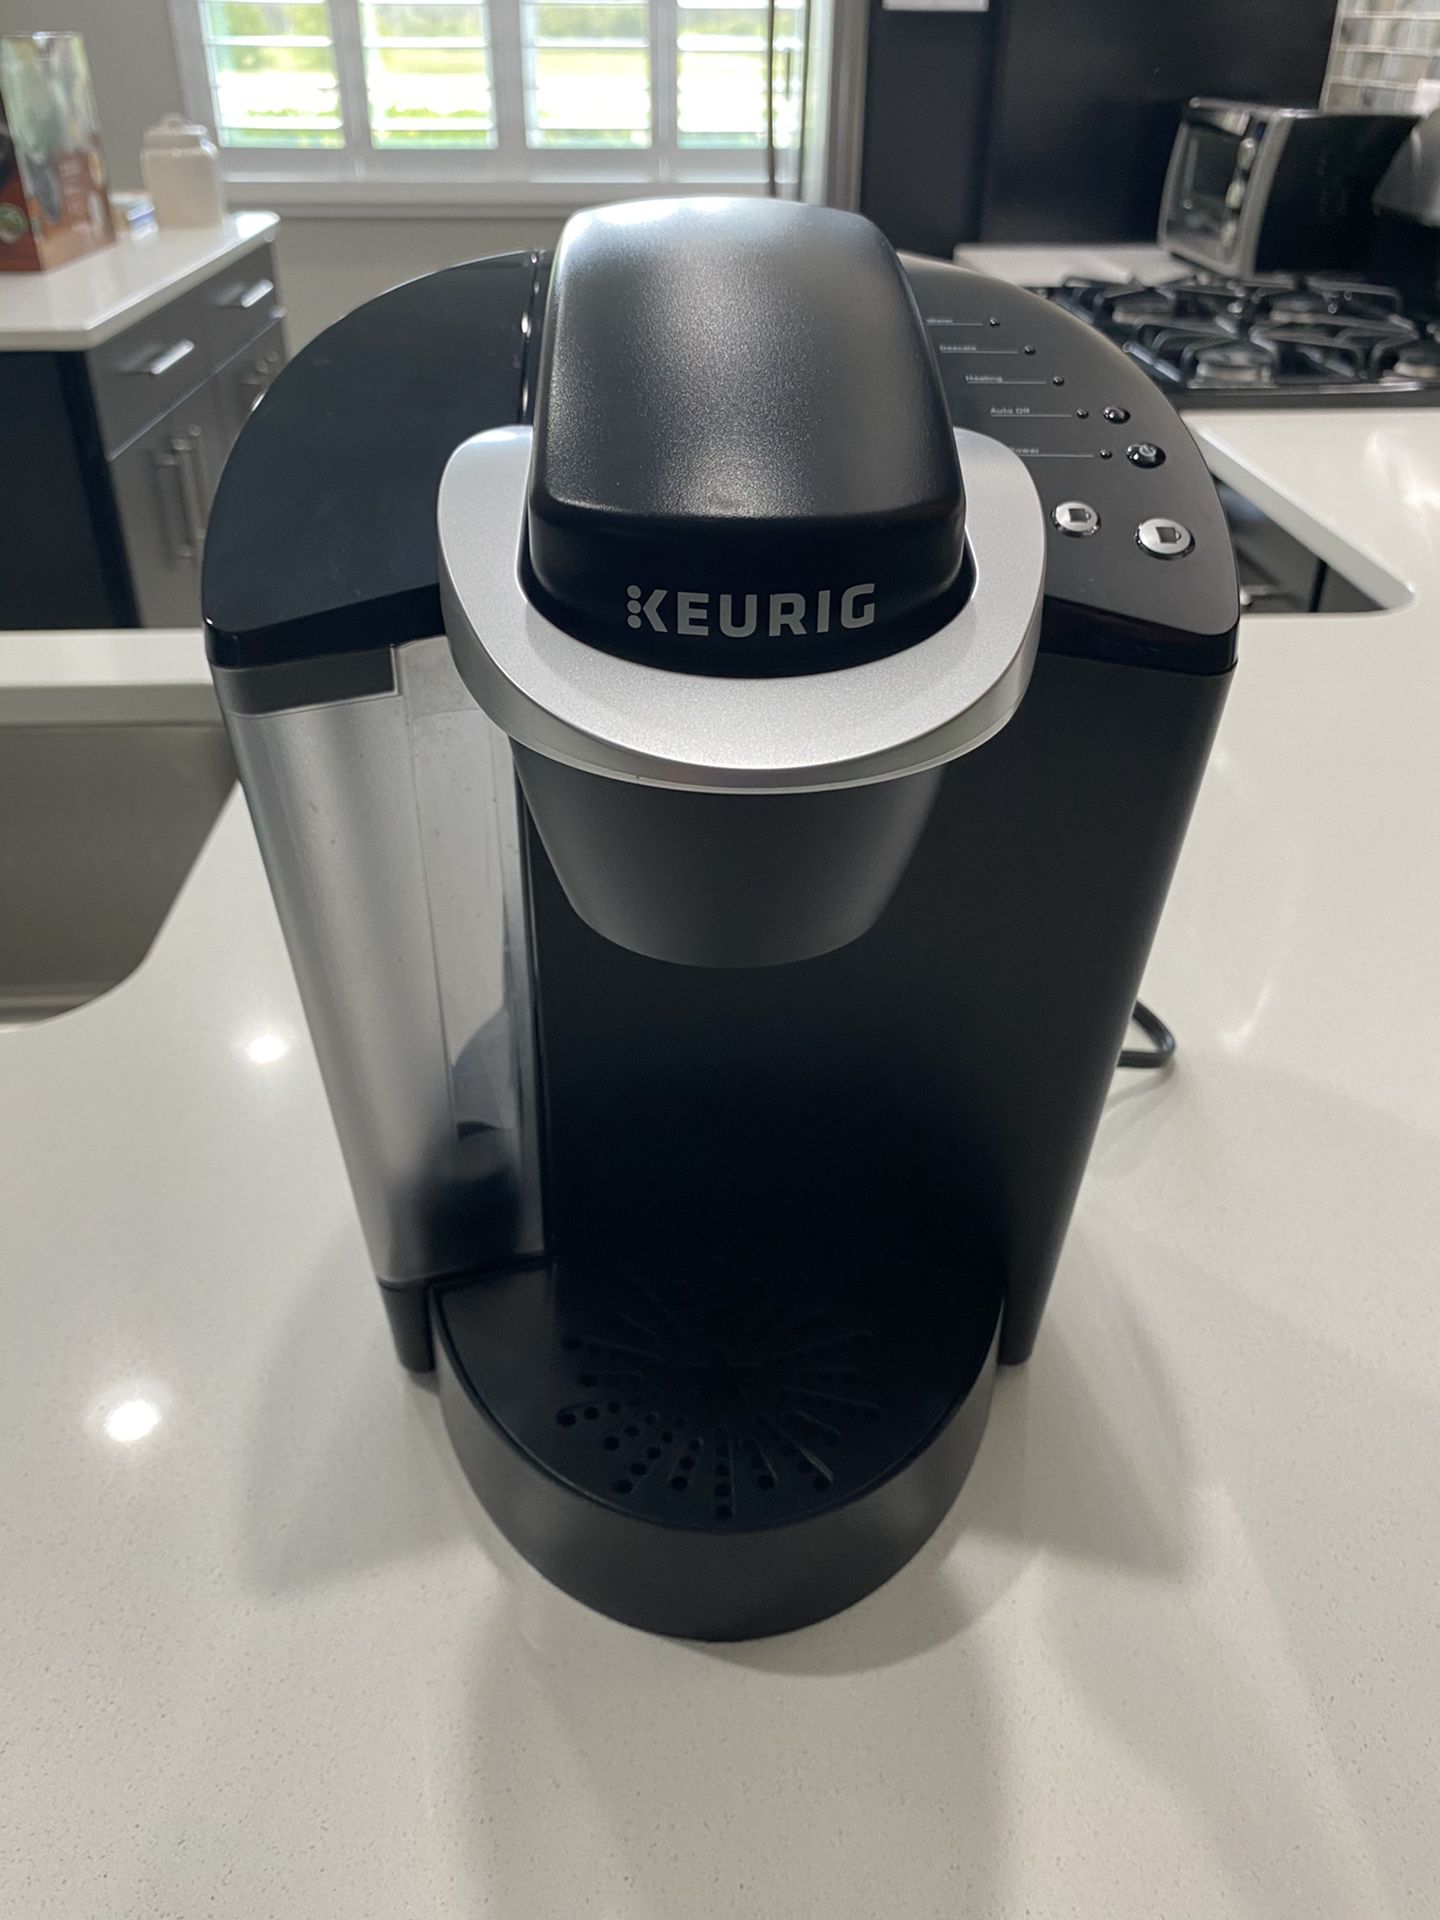 Excellent condition 1 Keurig 1 Cuisinart coffee makers $65 for both